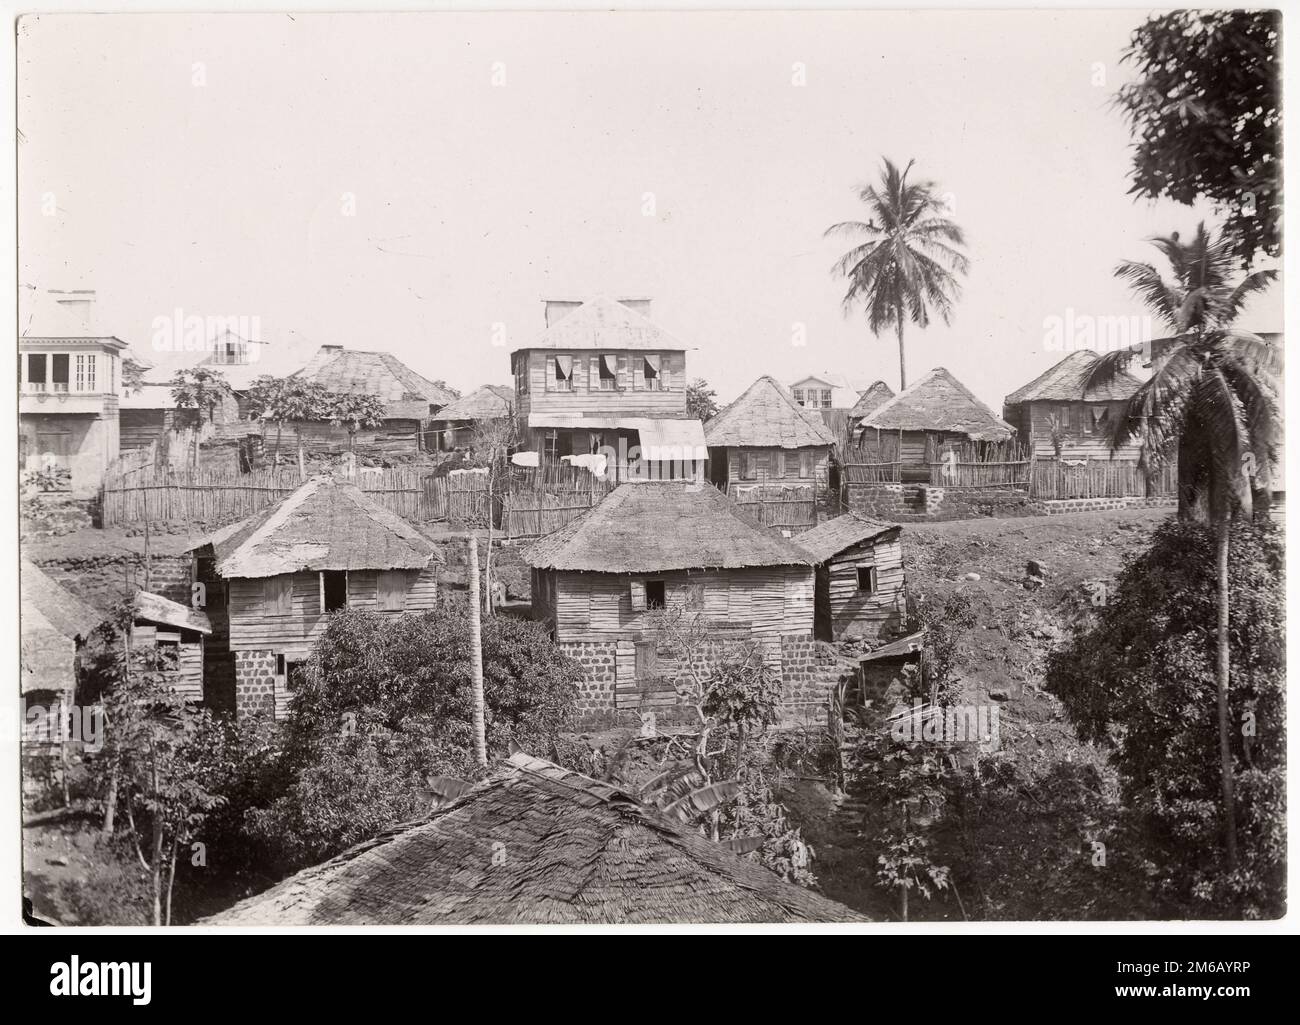 Alphonso Lisk-Carew studio: c.1910 West Africa Sierra Leone - view in the city of Freetown Stock Photo